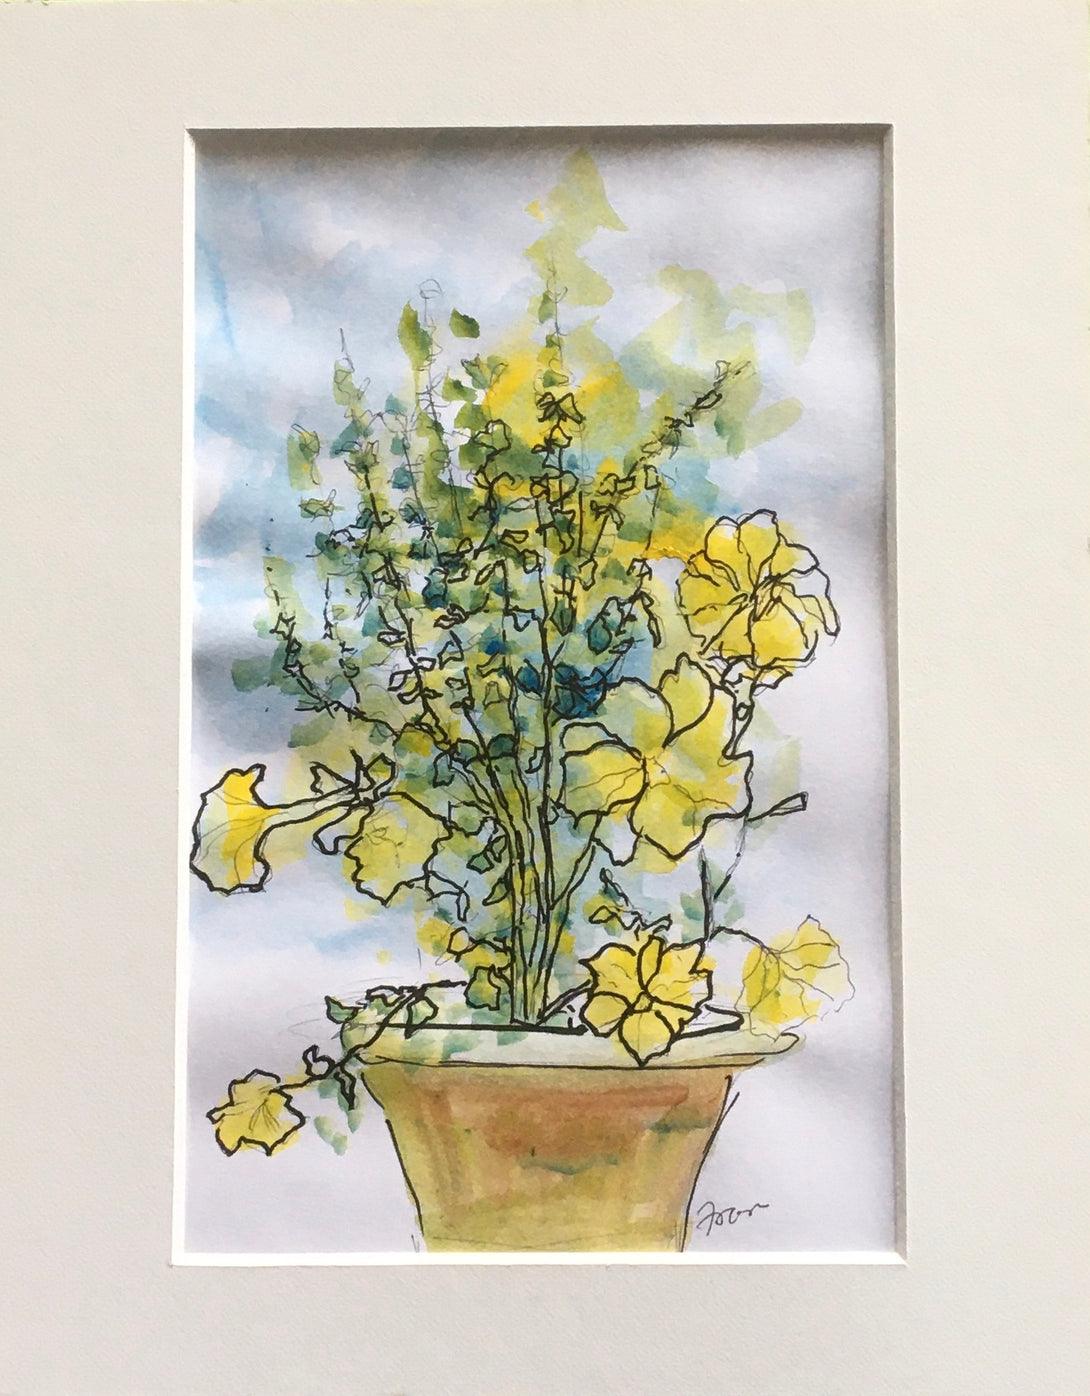 Fran Renwick - Watercolour painting - Potted plant, matted, unframed by Fran Renwick - McMillan Arts Centre - Vancouver Island Art Gallery